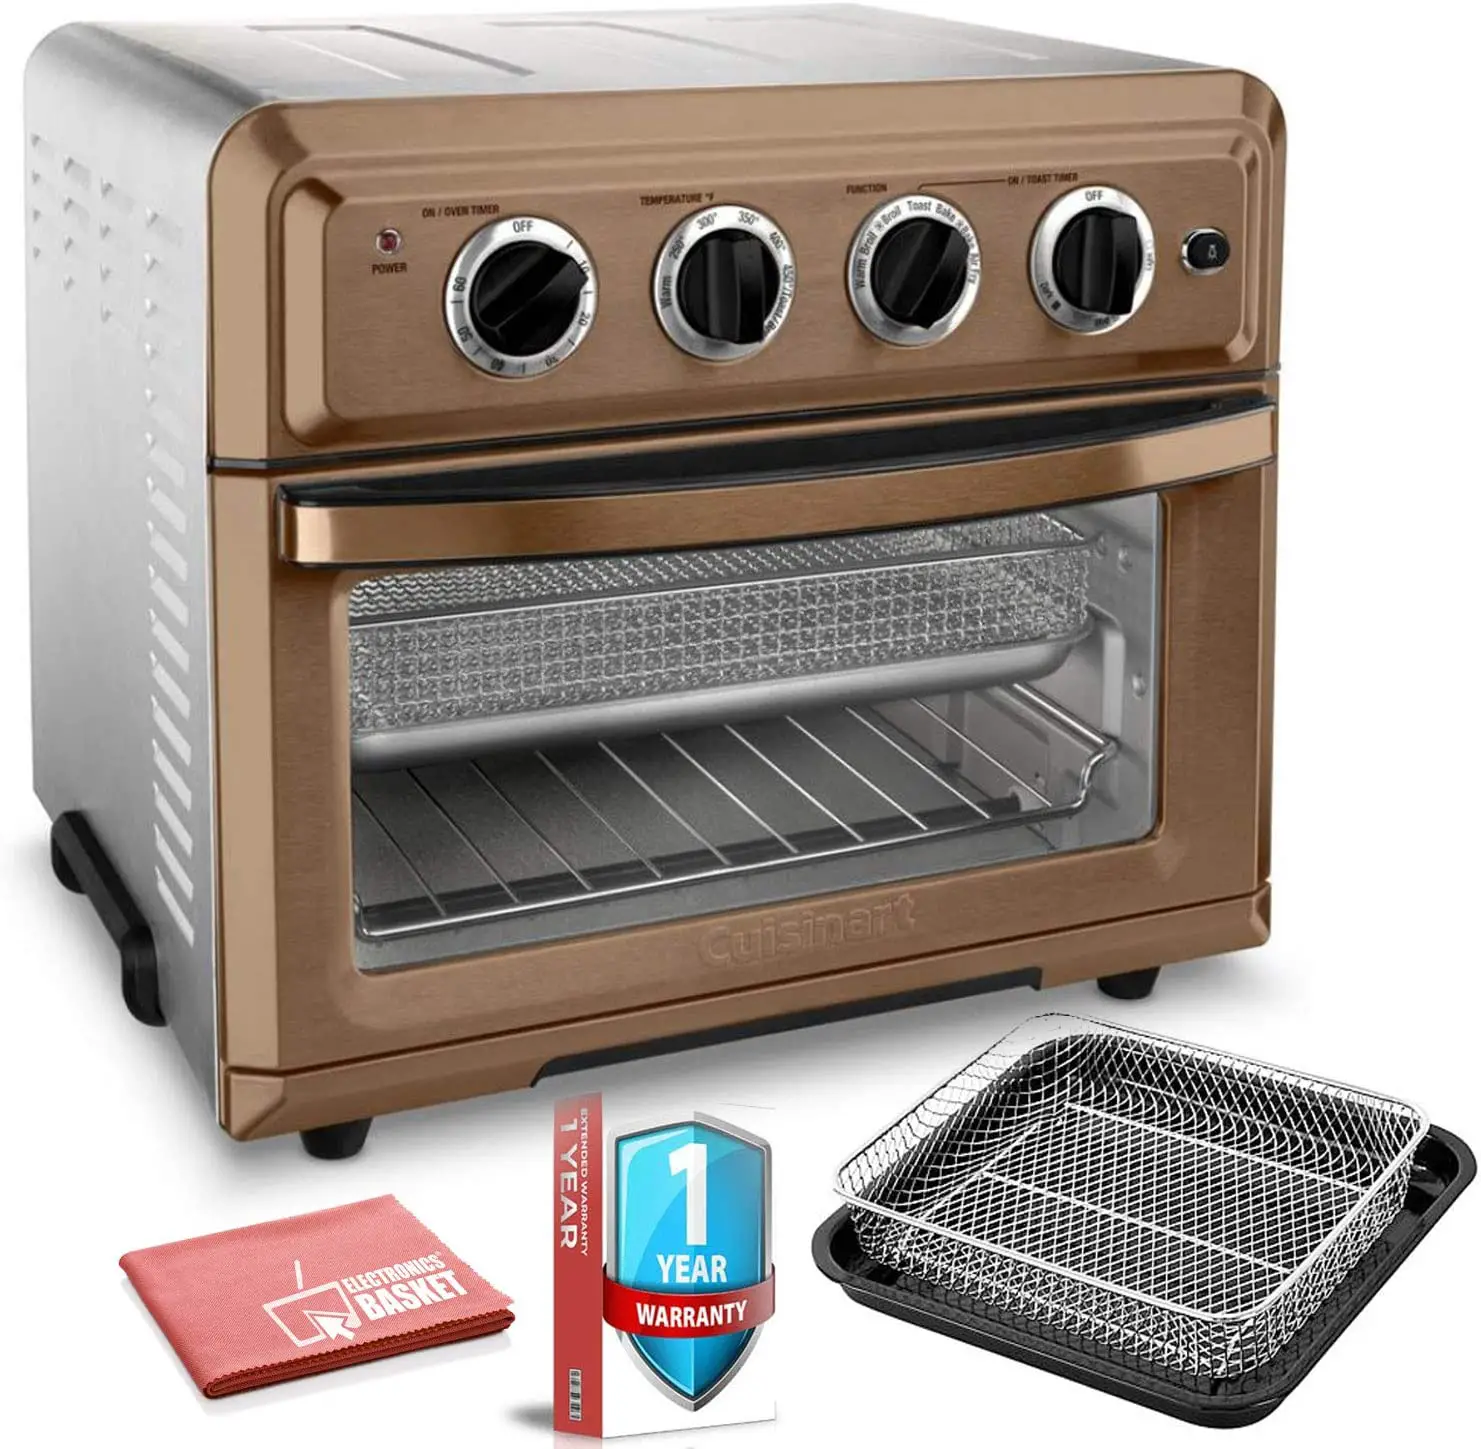 Amazon.com: CUITOA60CS Air Fryer Toaster Oven (Copper Classic) with ...